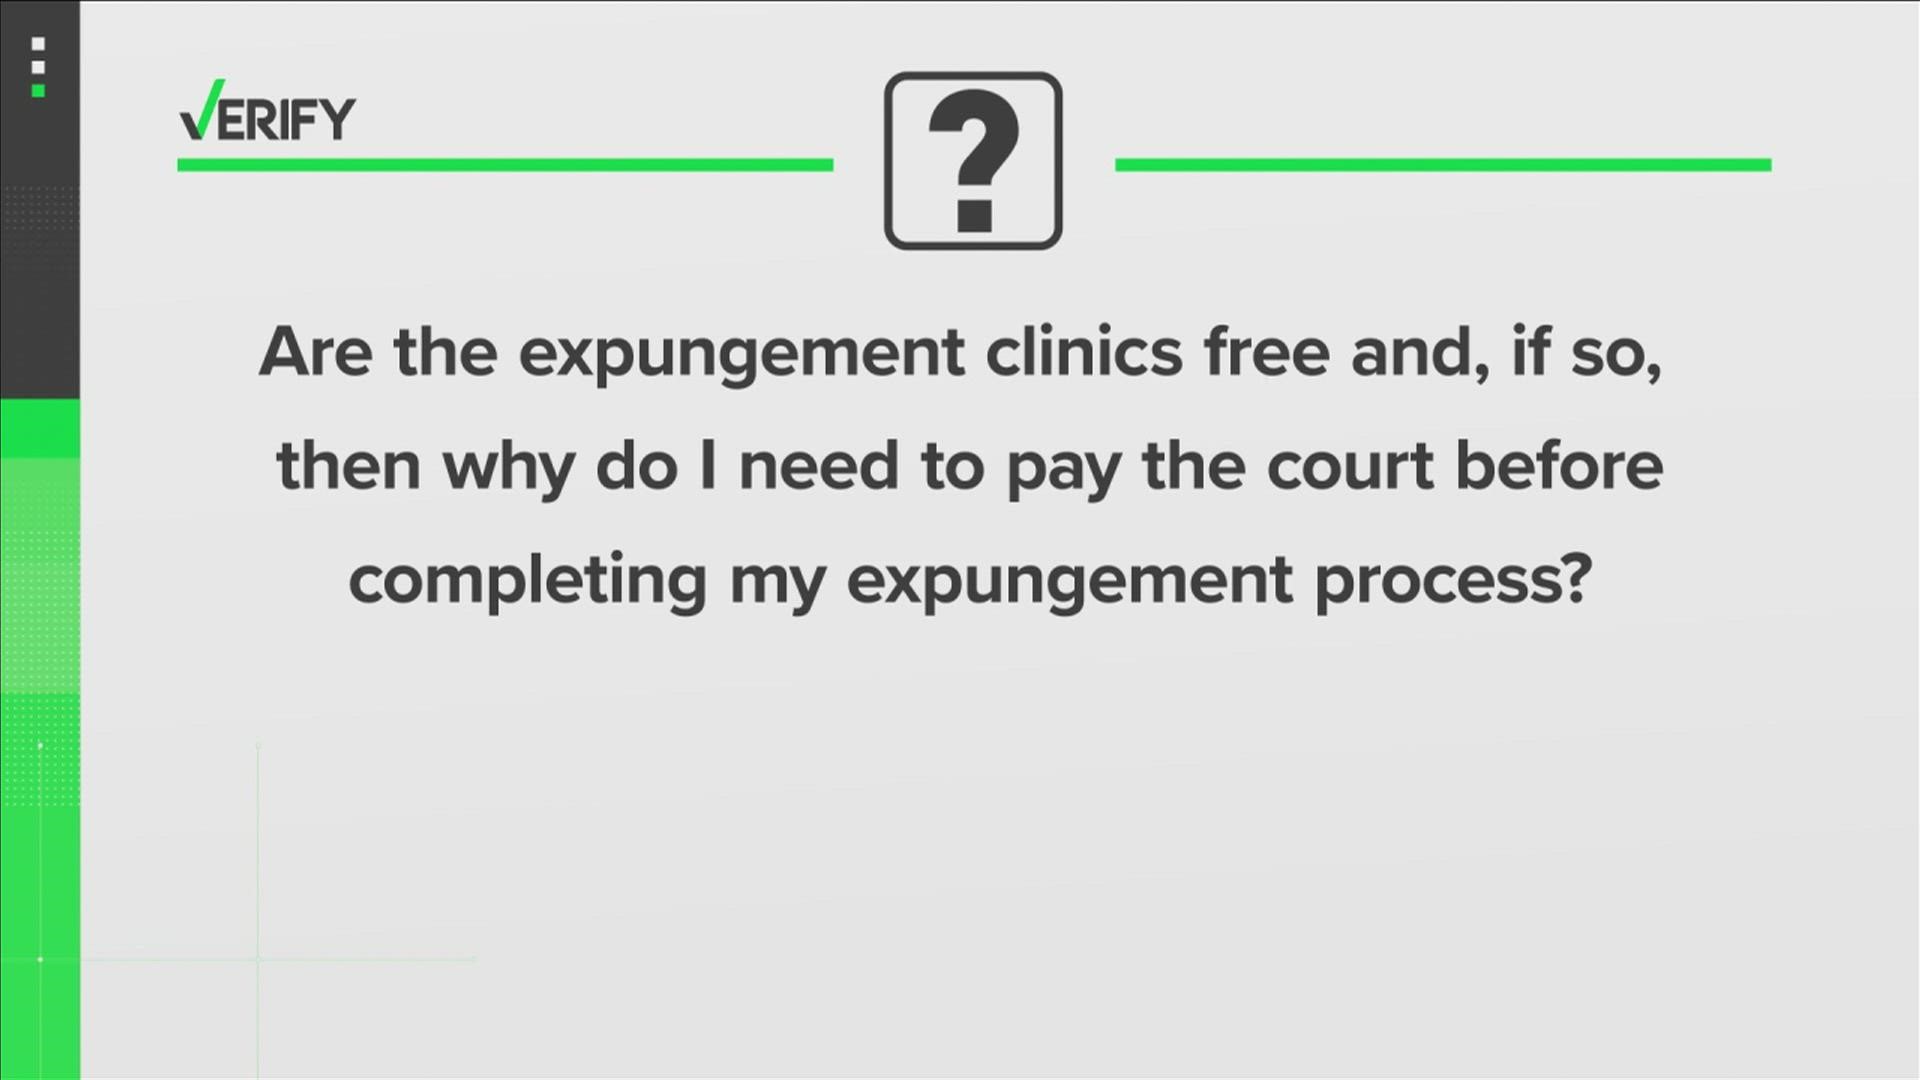 ABC24 viewers at the event asked us, "are the expungement clinics free, and if so, why do I need to pay the court before completing my expungement process?"